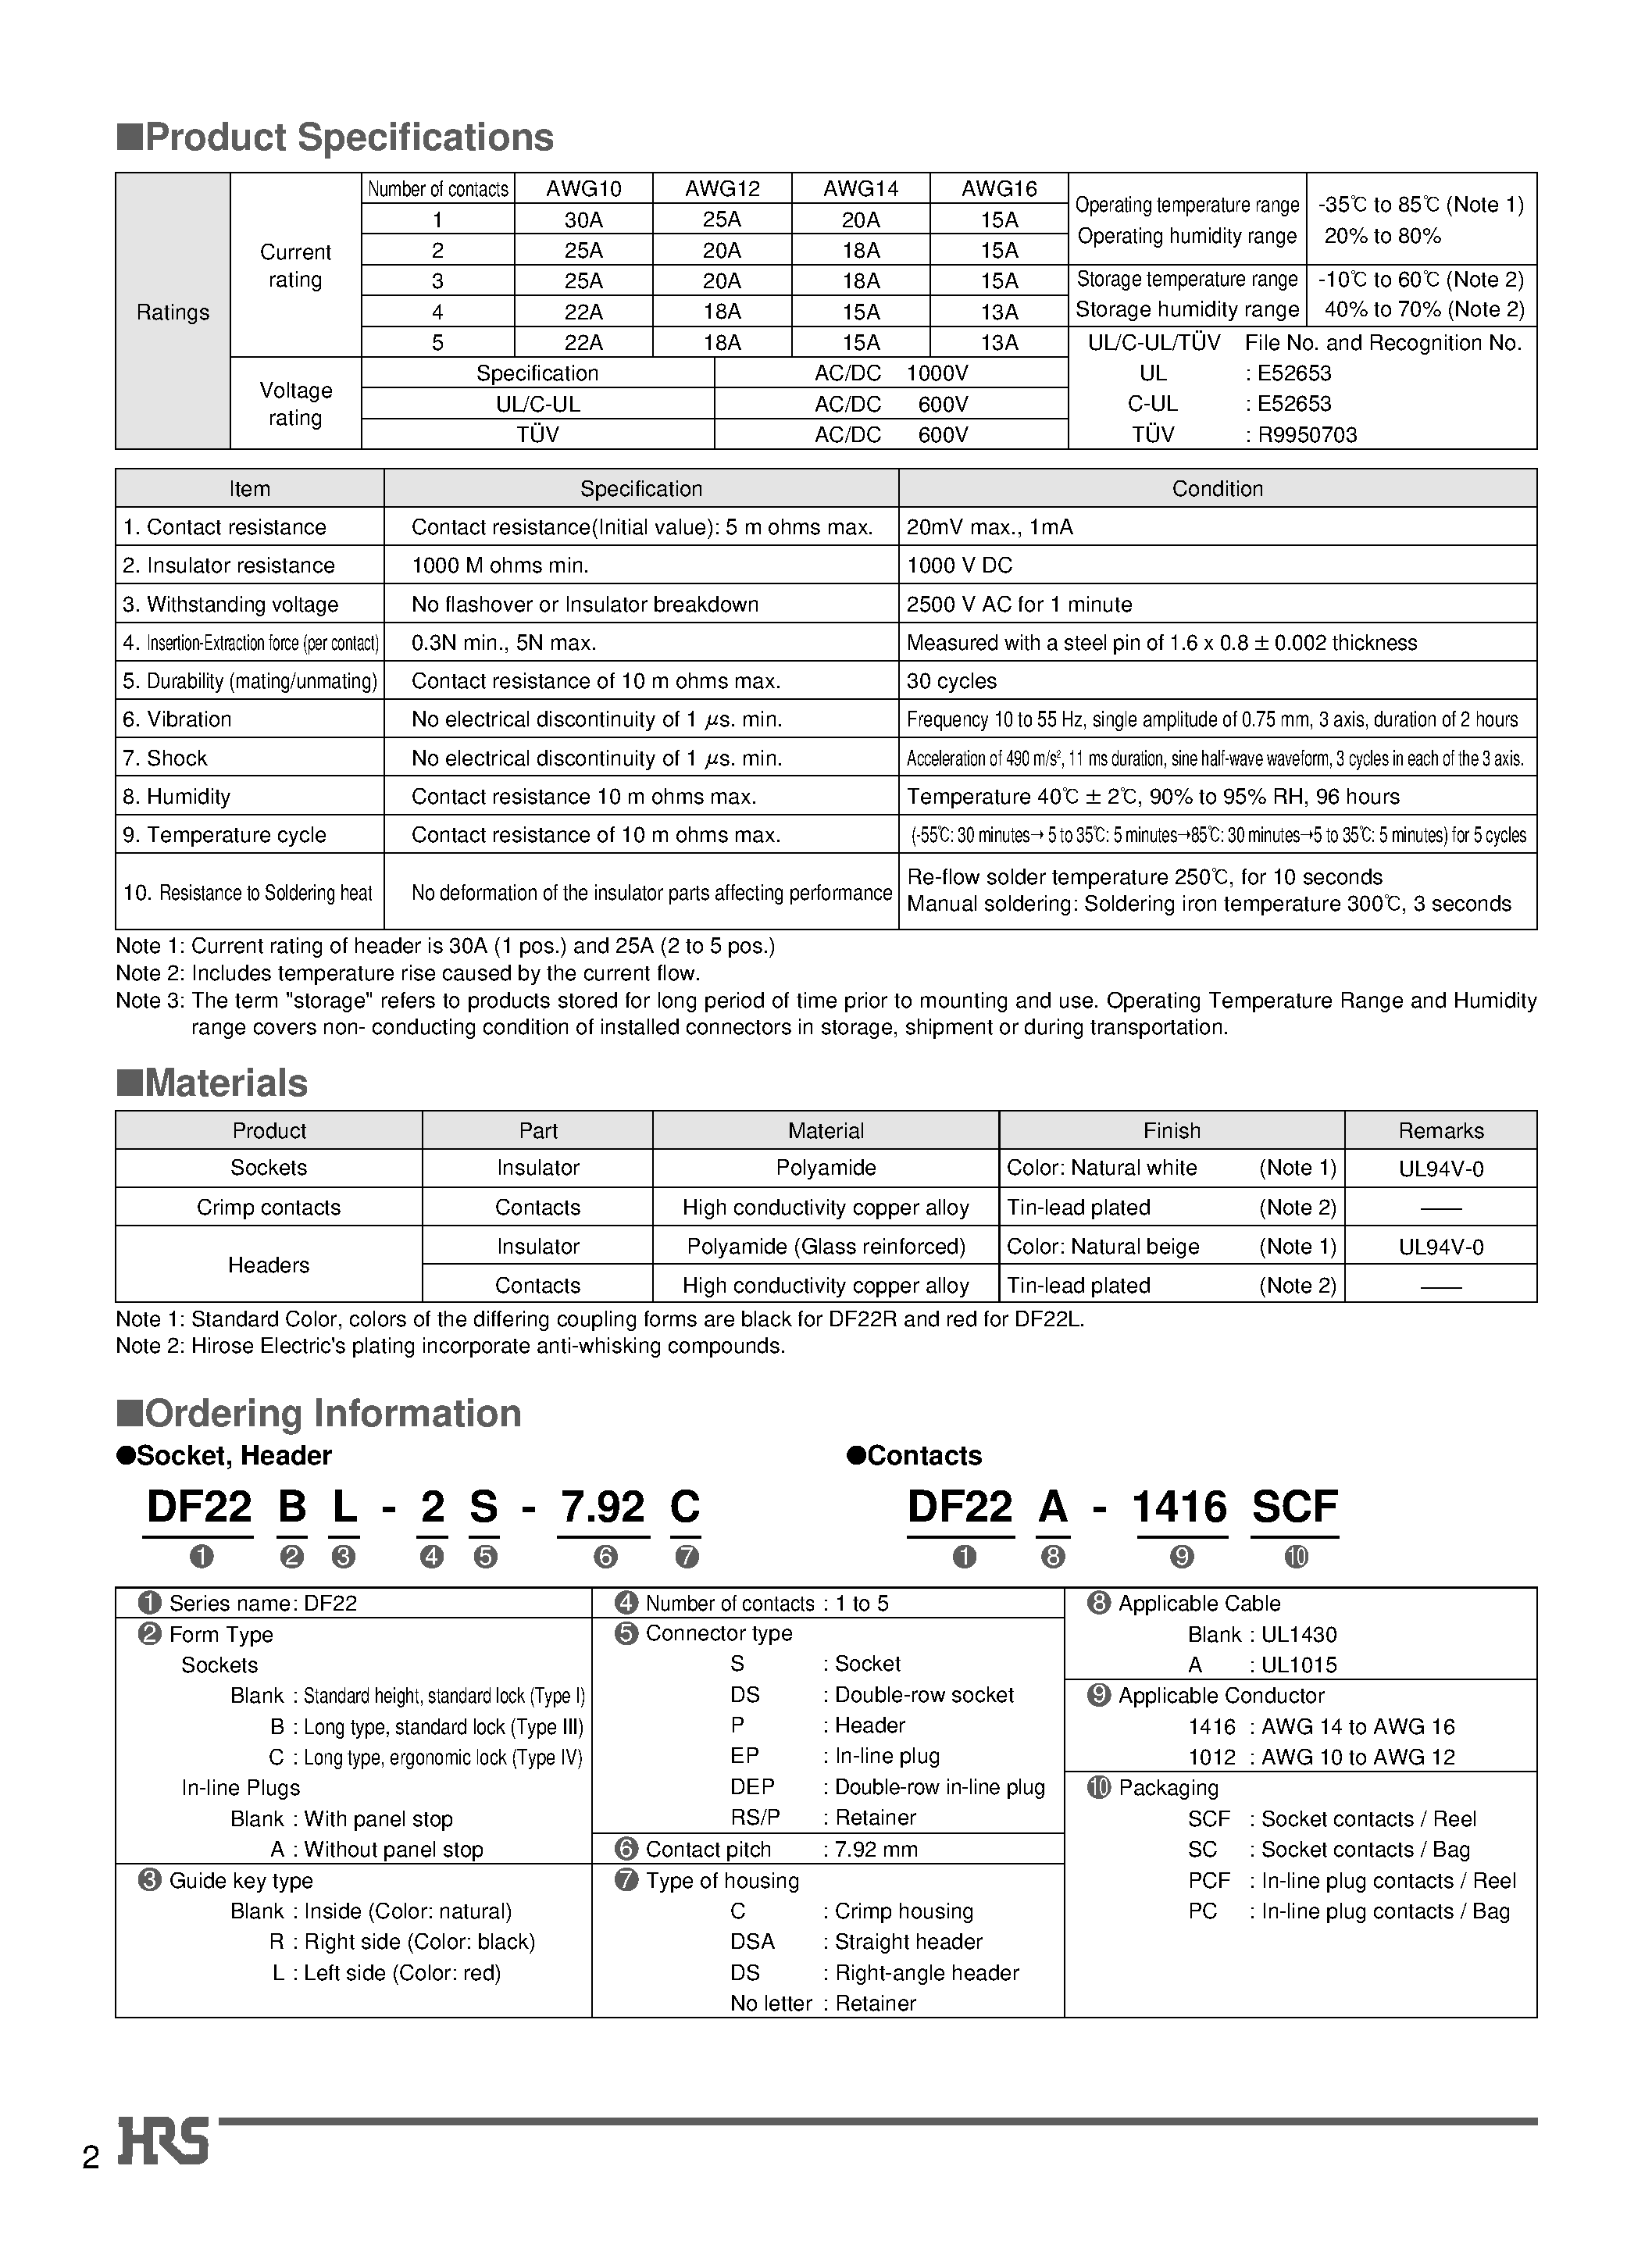 Datasheet DF22-2EP-7.92C - 7.92 mm Contact Pitch/ High-Current Connectors for Internal Power Supplies (UL/ C-UL and TUV Listed) page 2